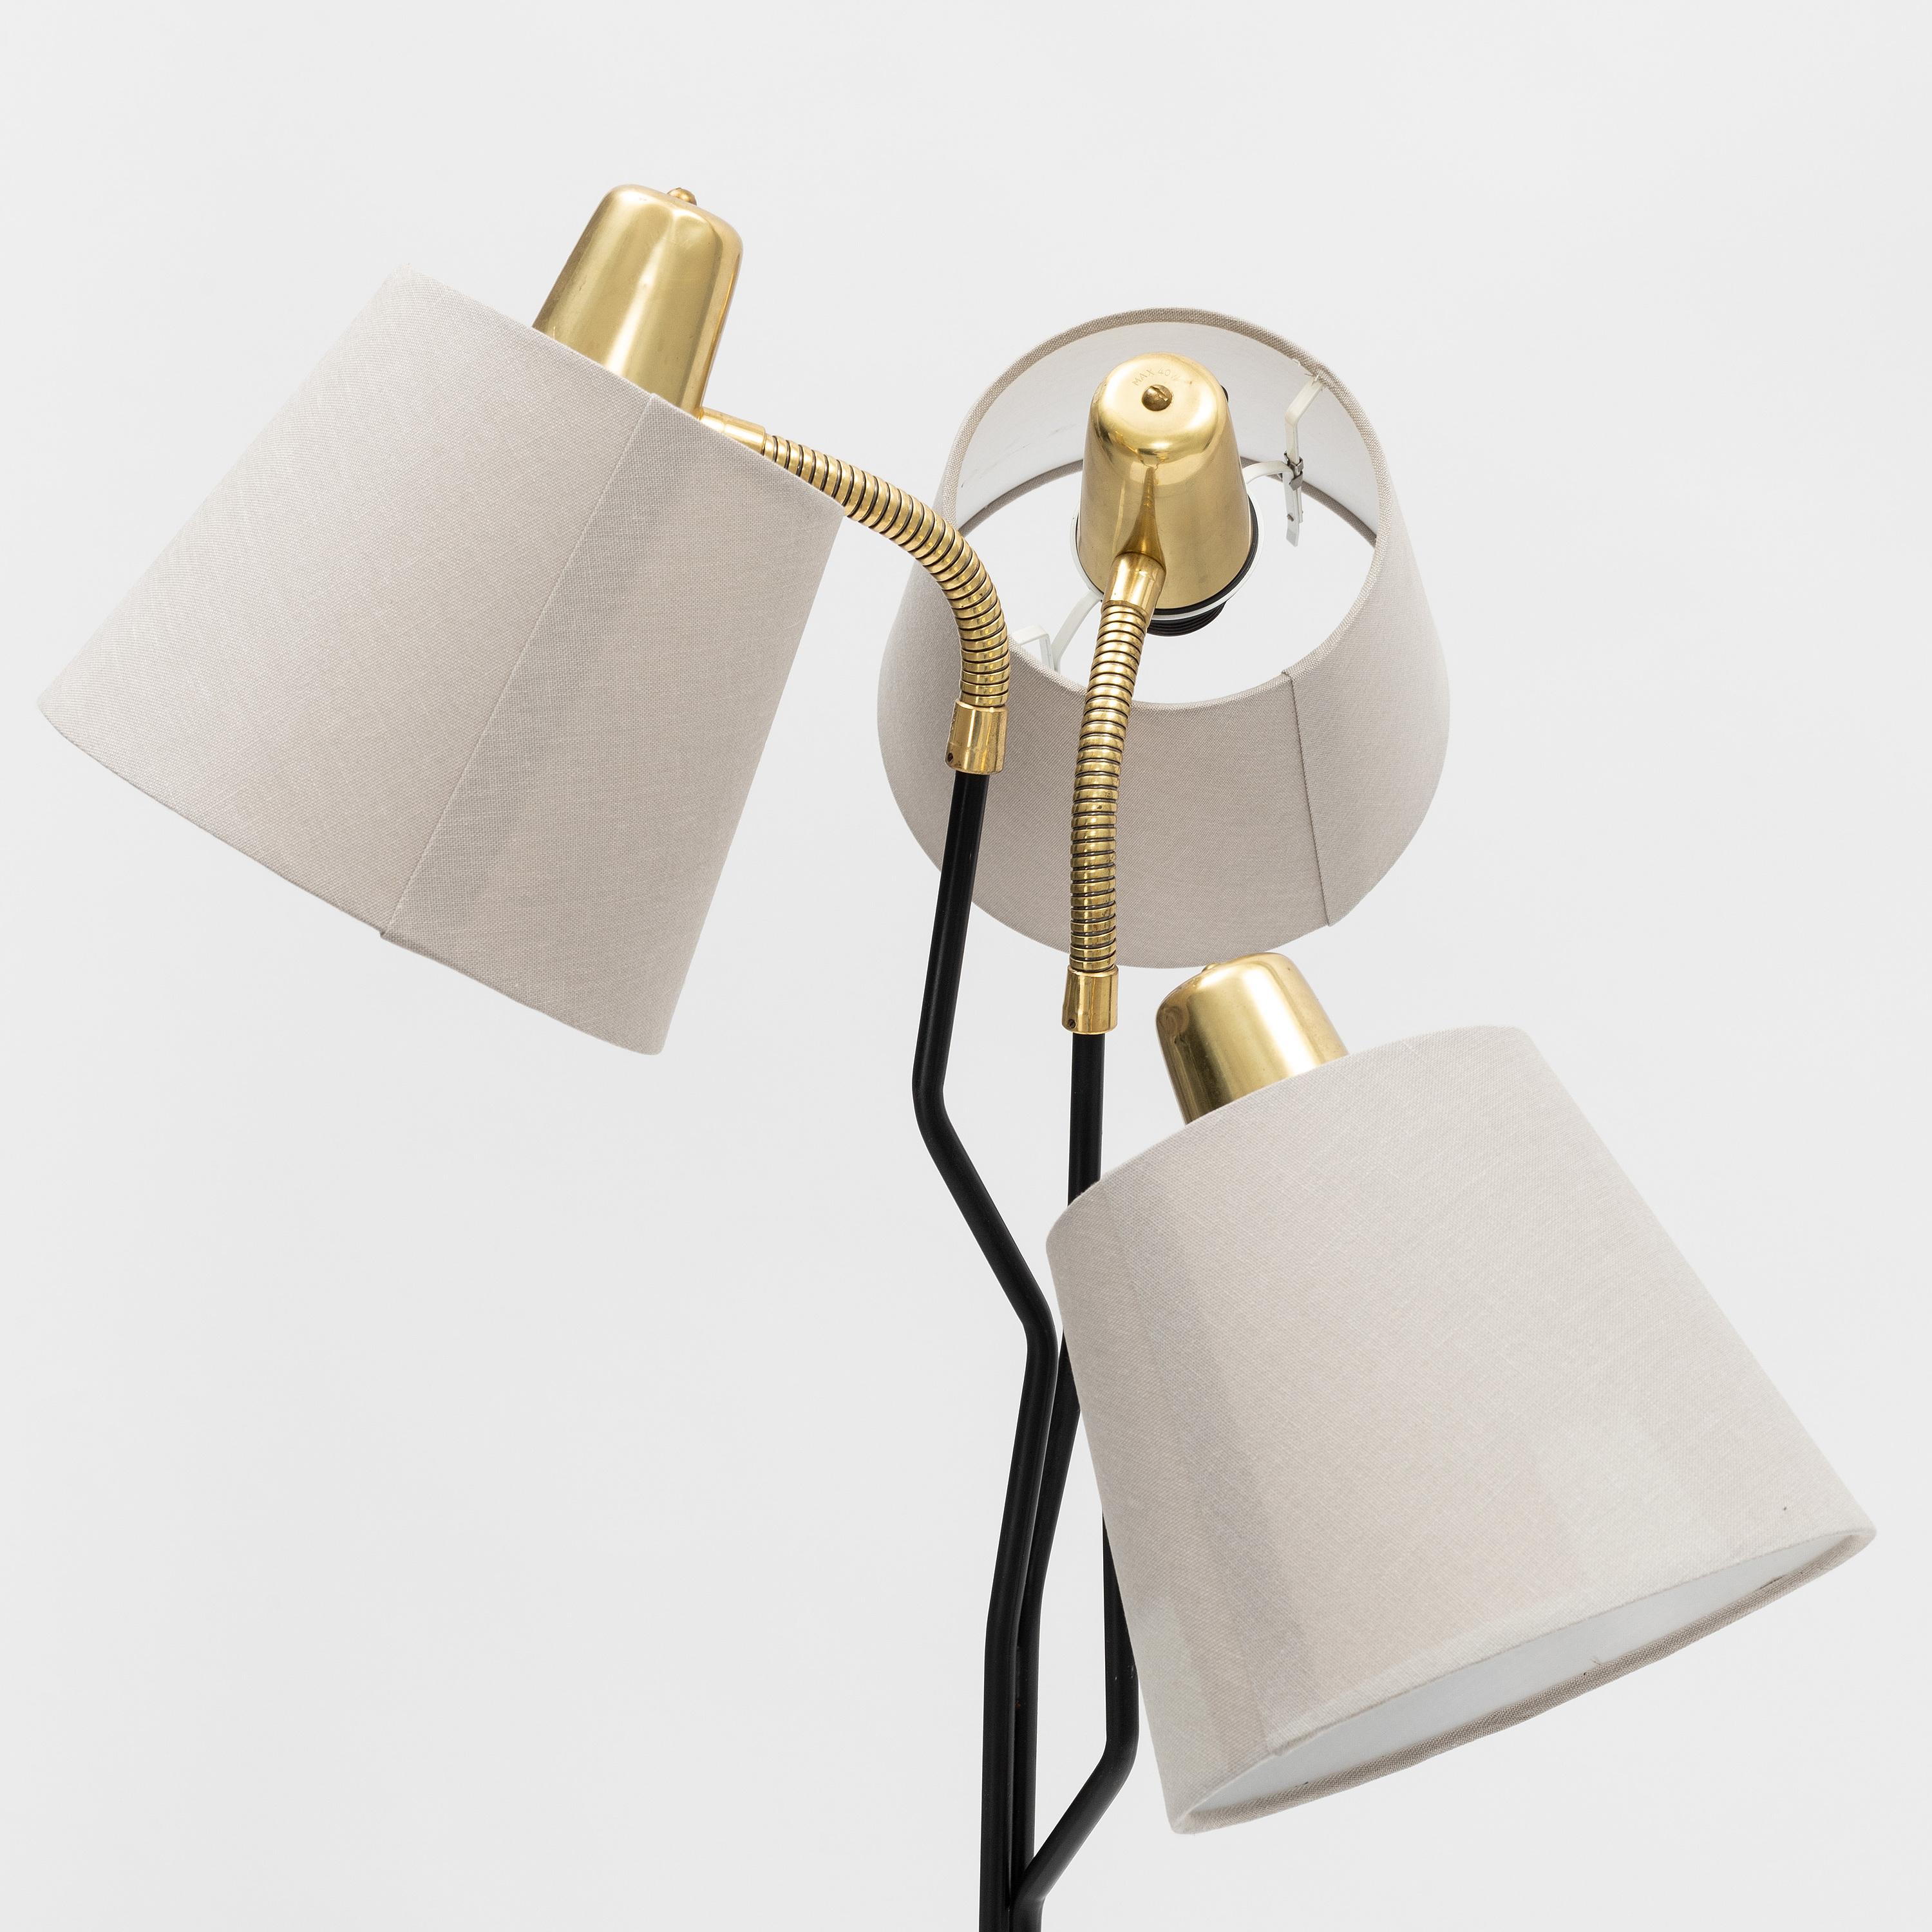 Cast iron base, 3 arms with goose neck fitted with E27 bakelite sockets and fabrics lamp shades. Designed in Sweden in the 1960s.